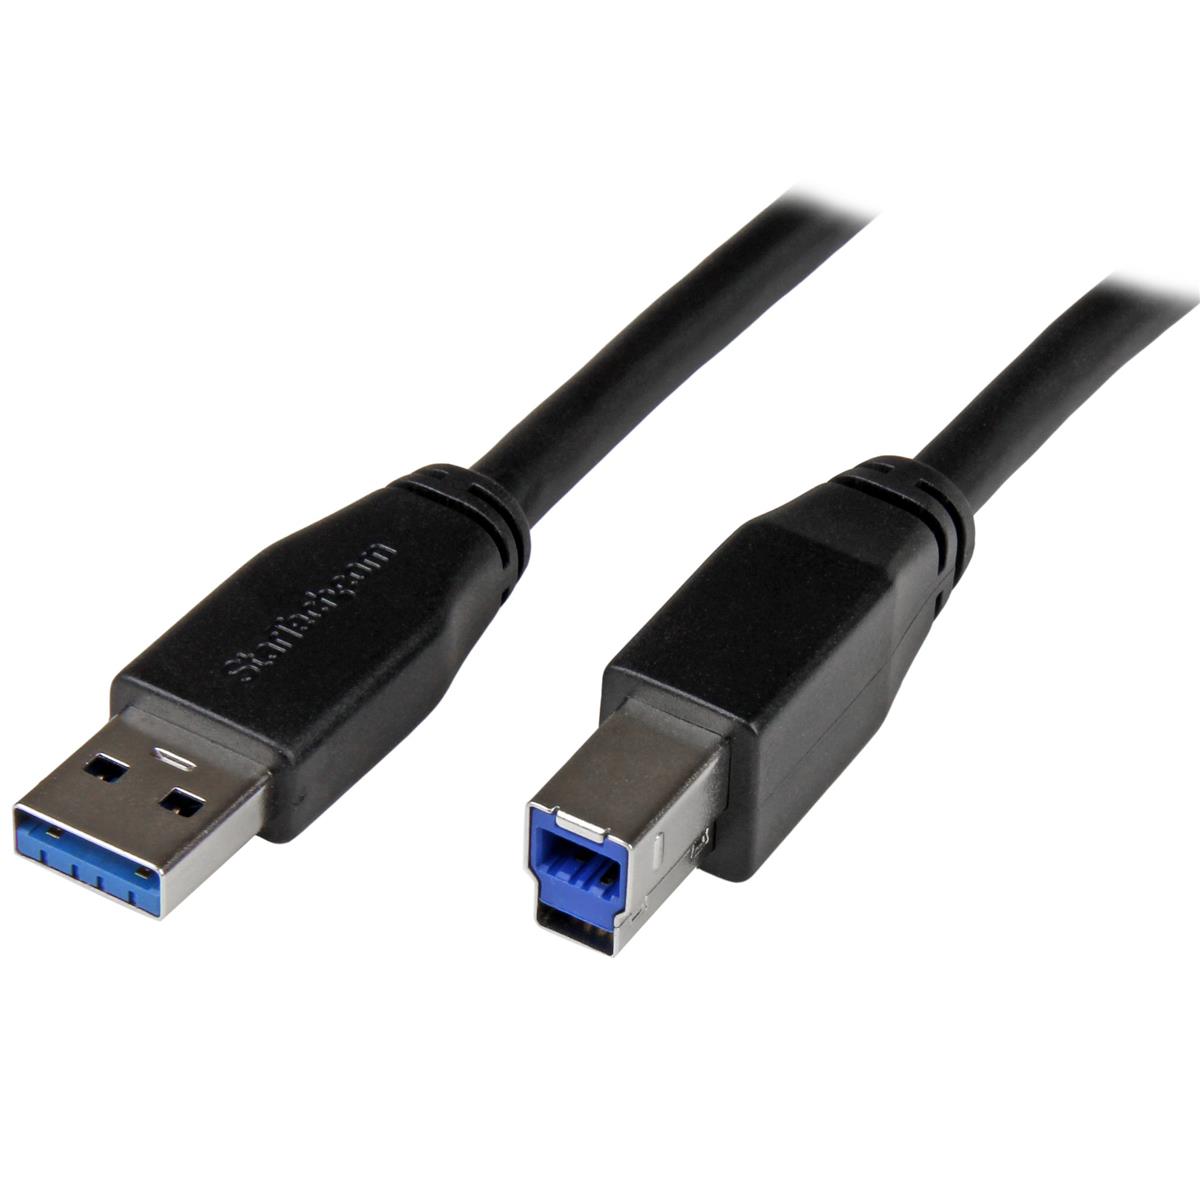 Photos - Cable (video, audio, USB) Startech.com StarTech 10m / 32.81' Active USB 3.0 SuperSpeed Cable USB3SAB10M 